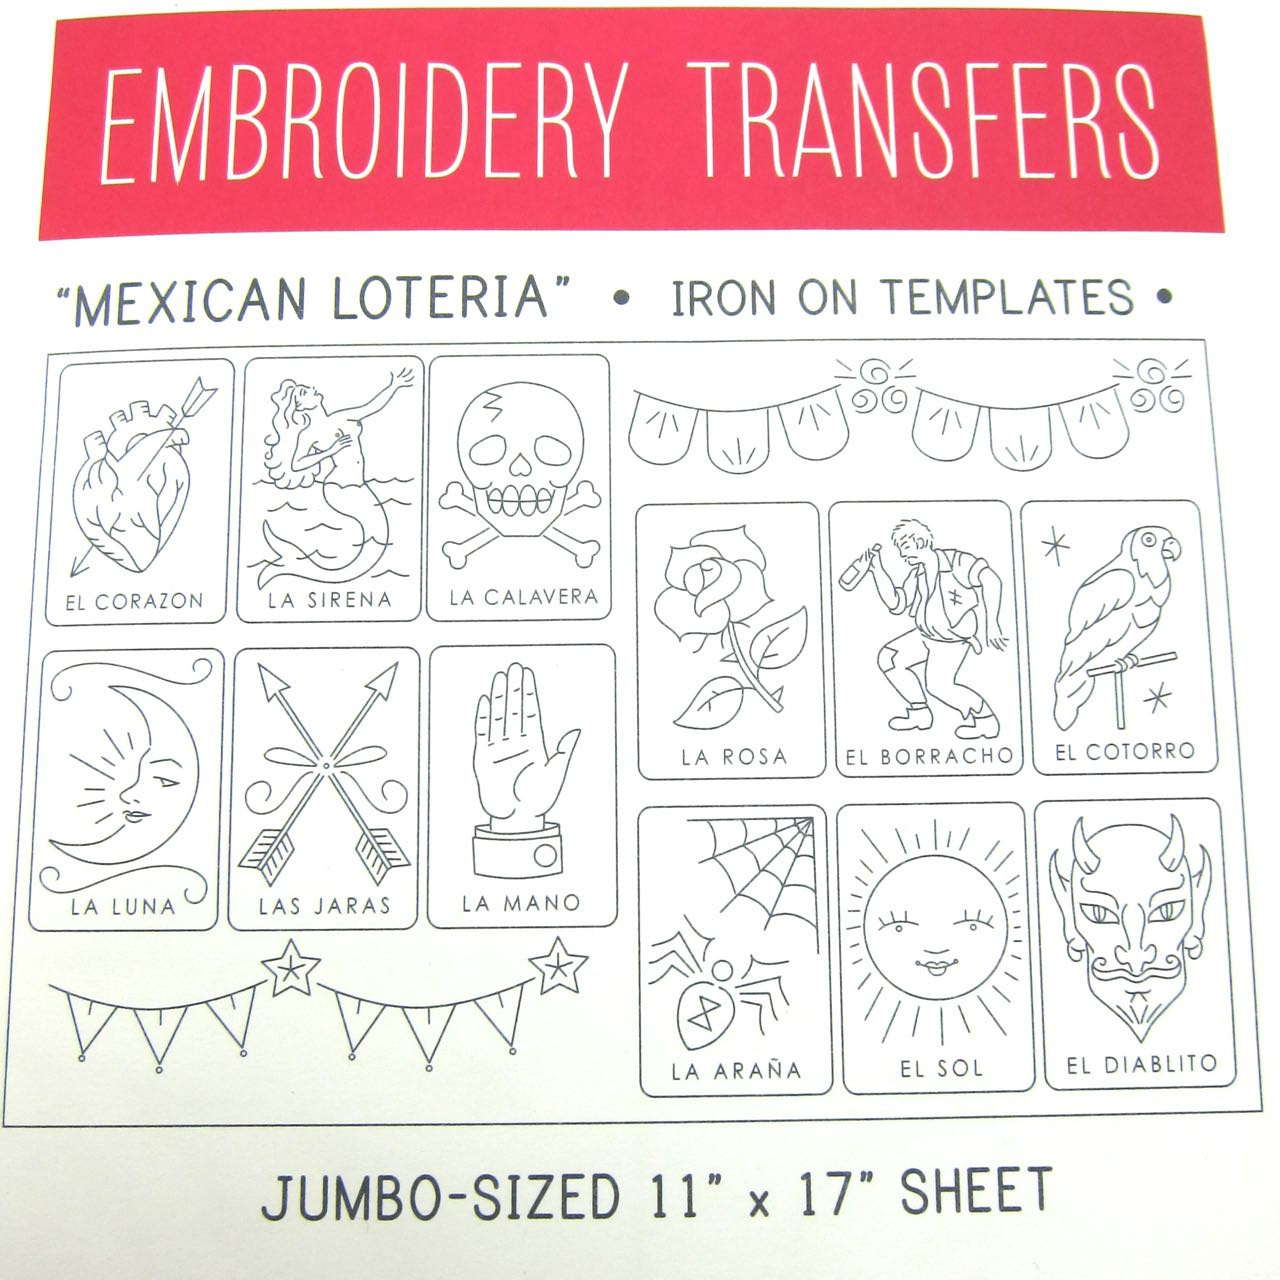 Mexican Embroidery Pattern Embroidery Pattern Sublime Stitching Iron On Transfer Hand Embroidery Pattern Mexican Loteria Big Sheet